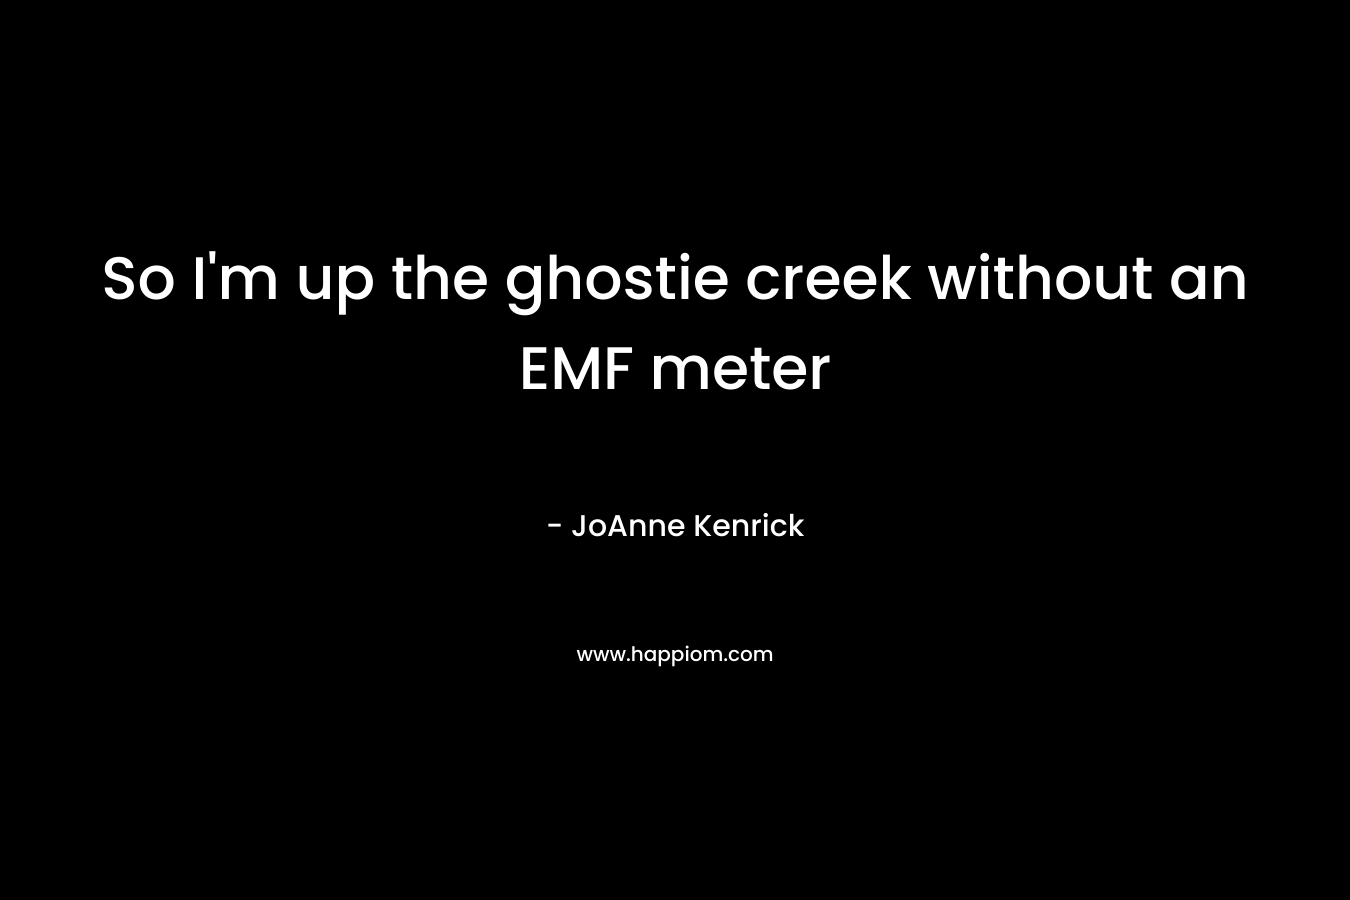 So I'm up the ghostie creek without an EMF meter